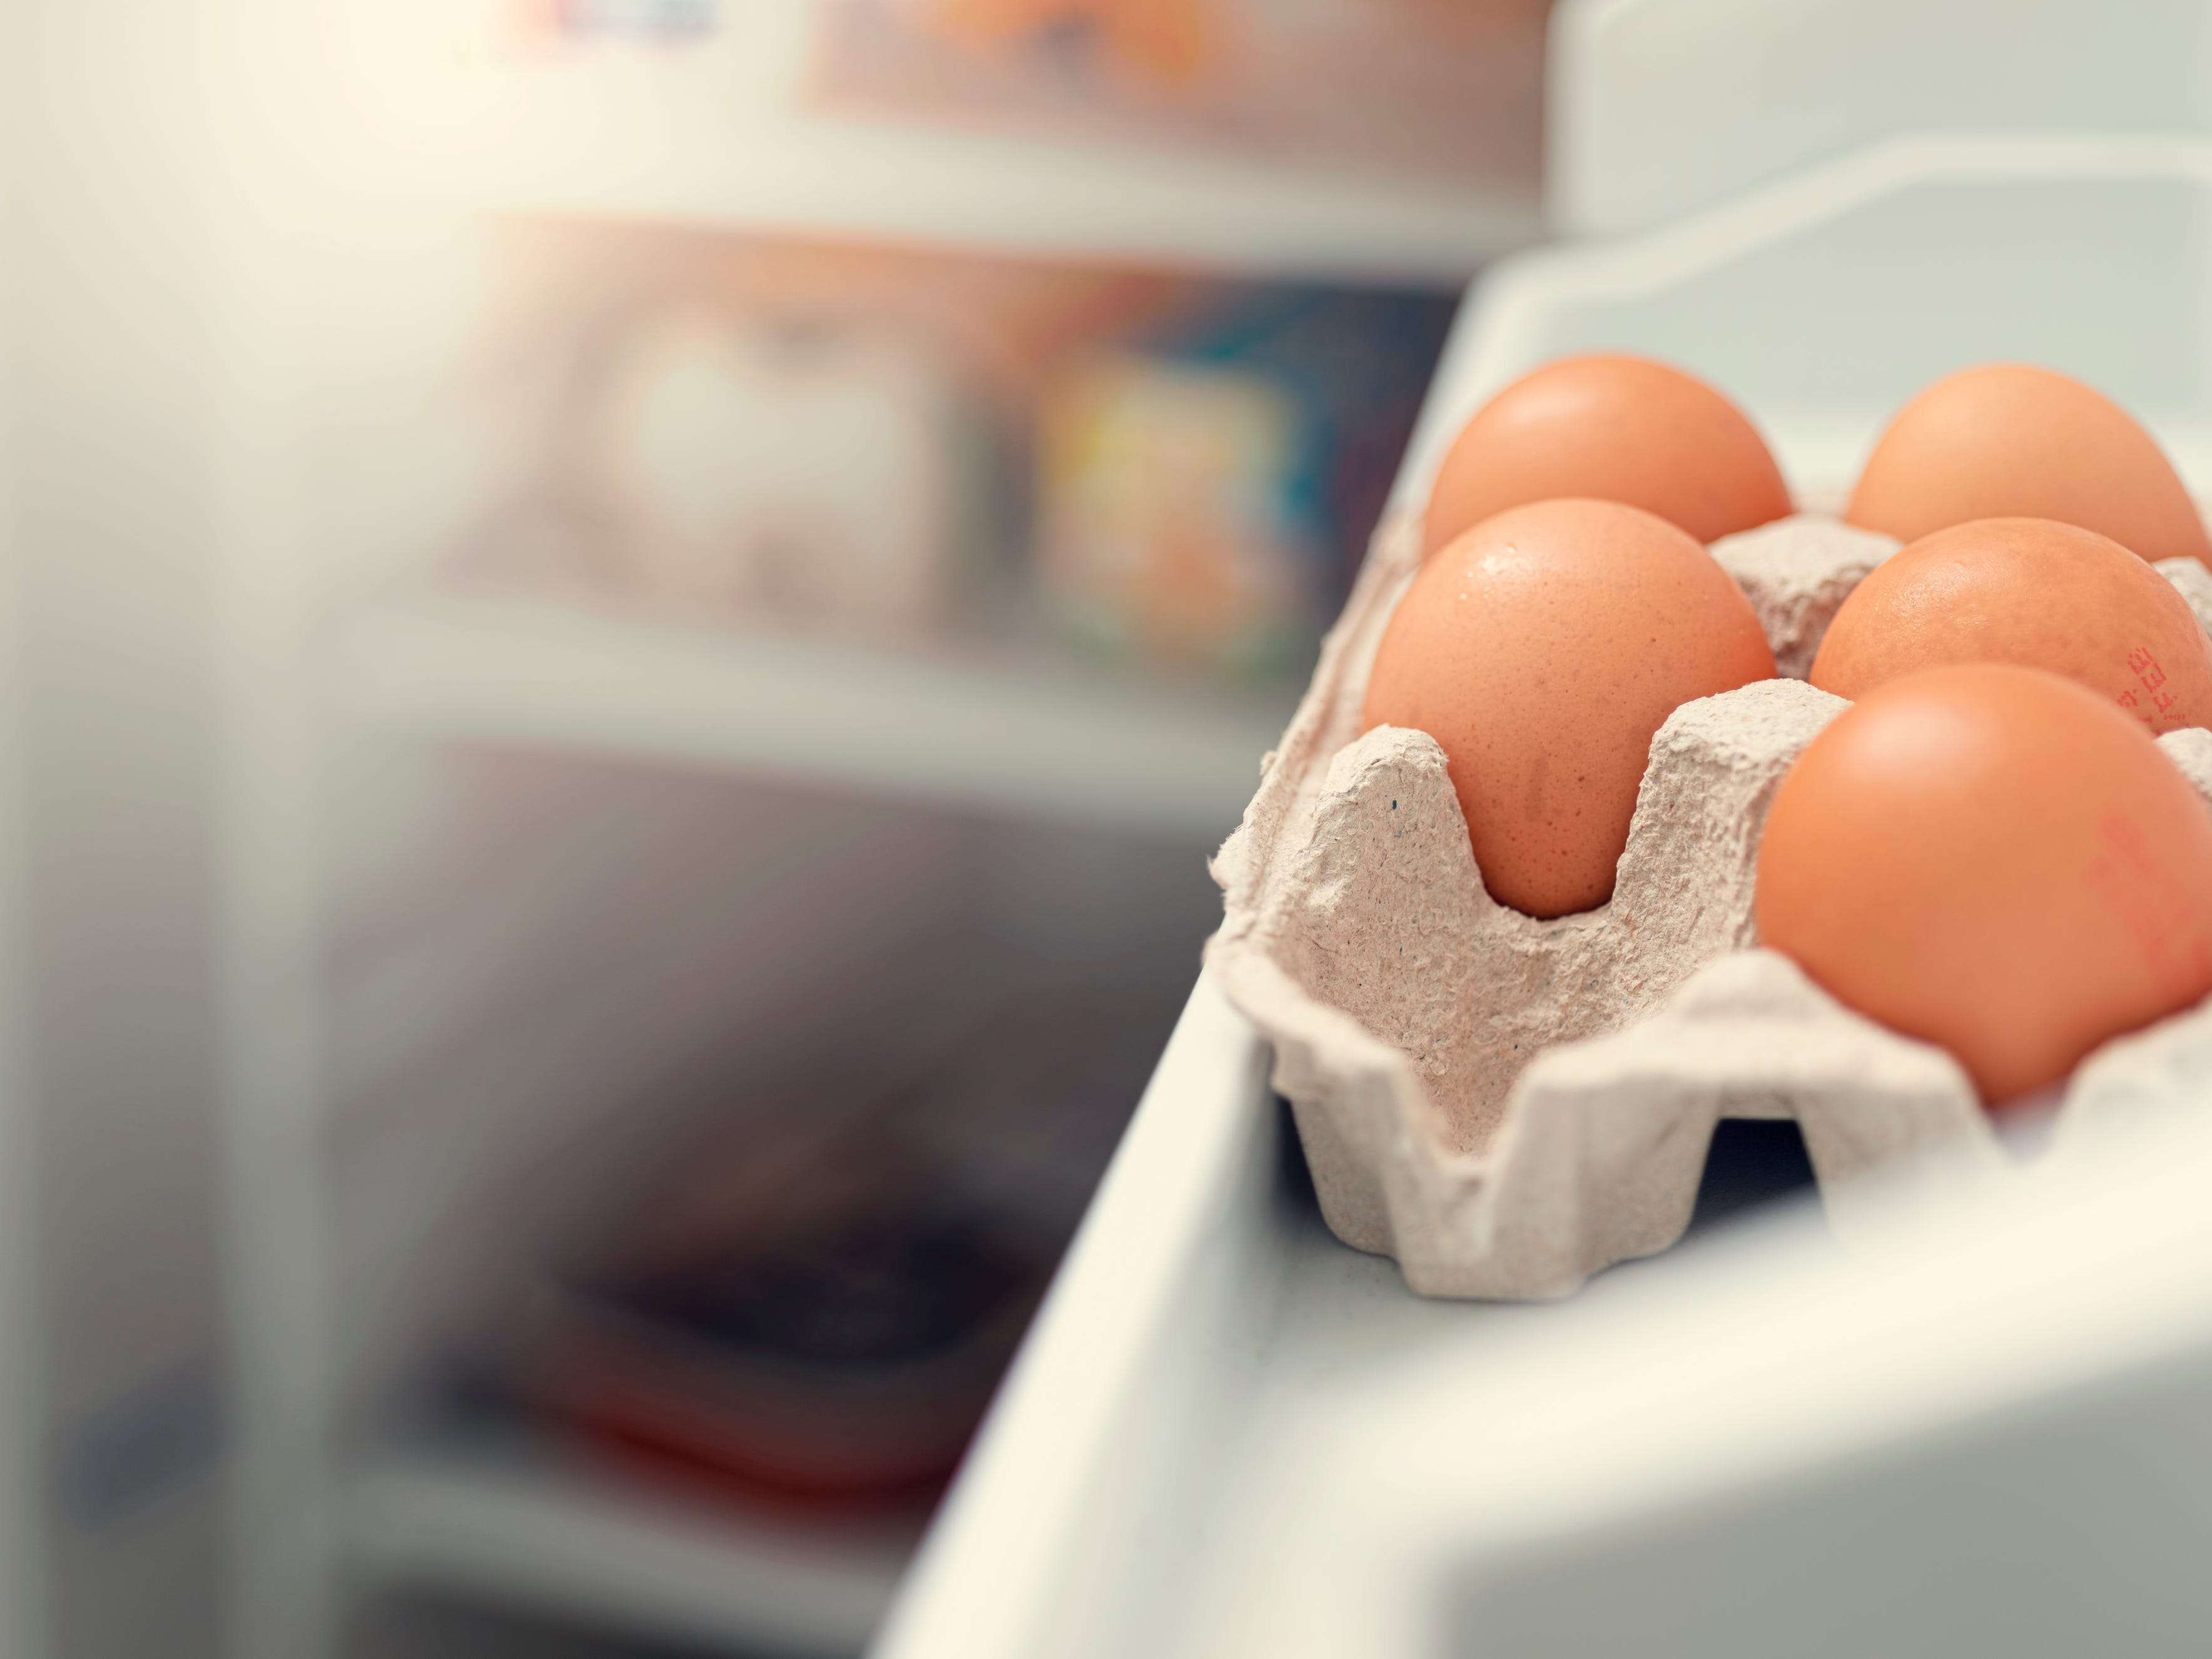 Brown versus white eggs: Which eggs to buy and why